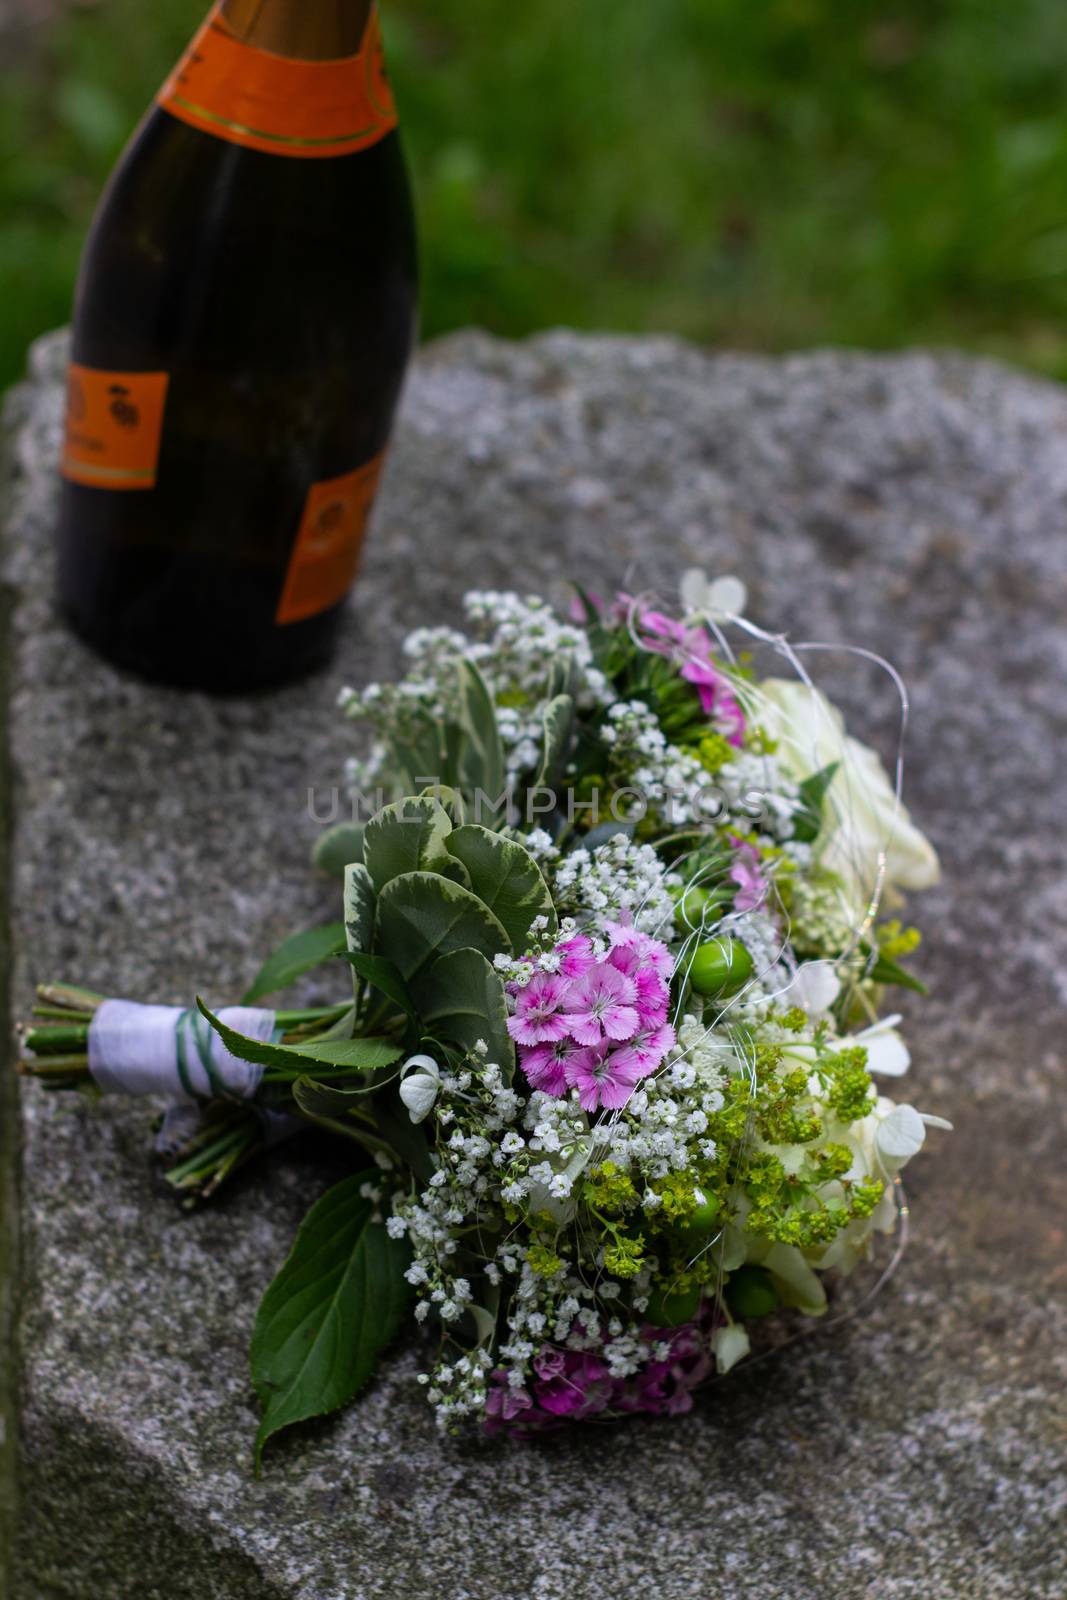 Wedding bouquet and bottle of wine for wedding by AnatoliiFoto